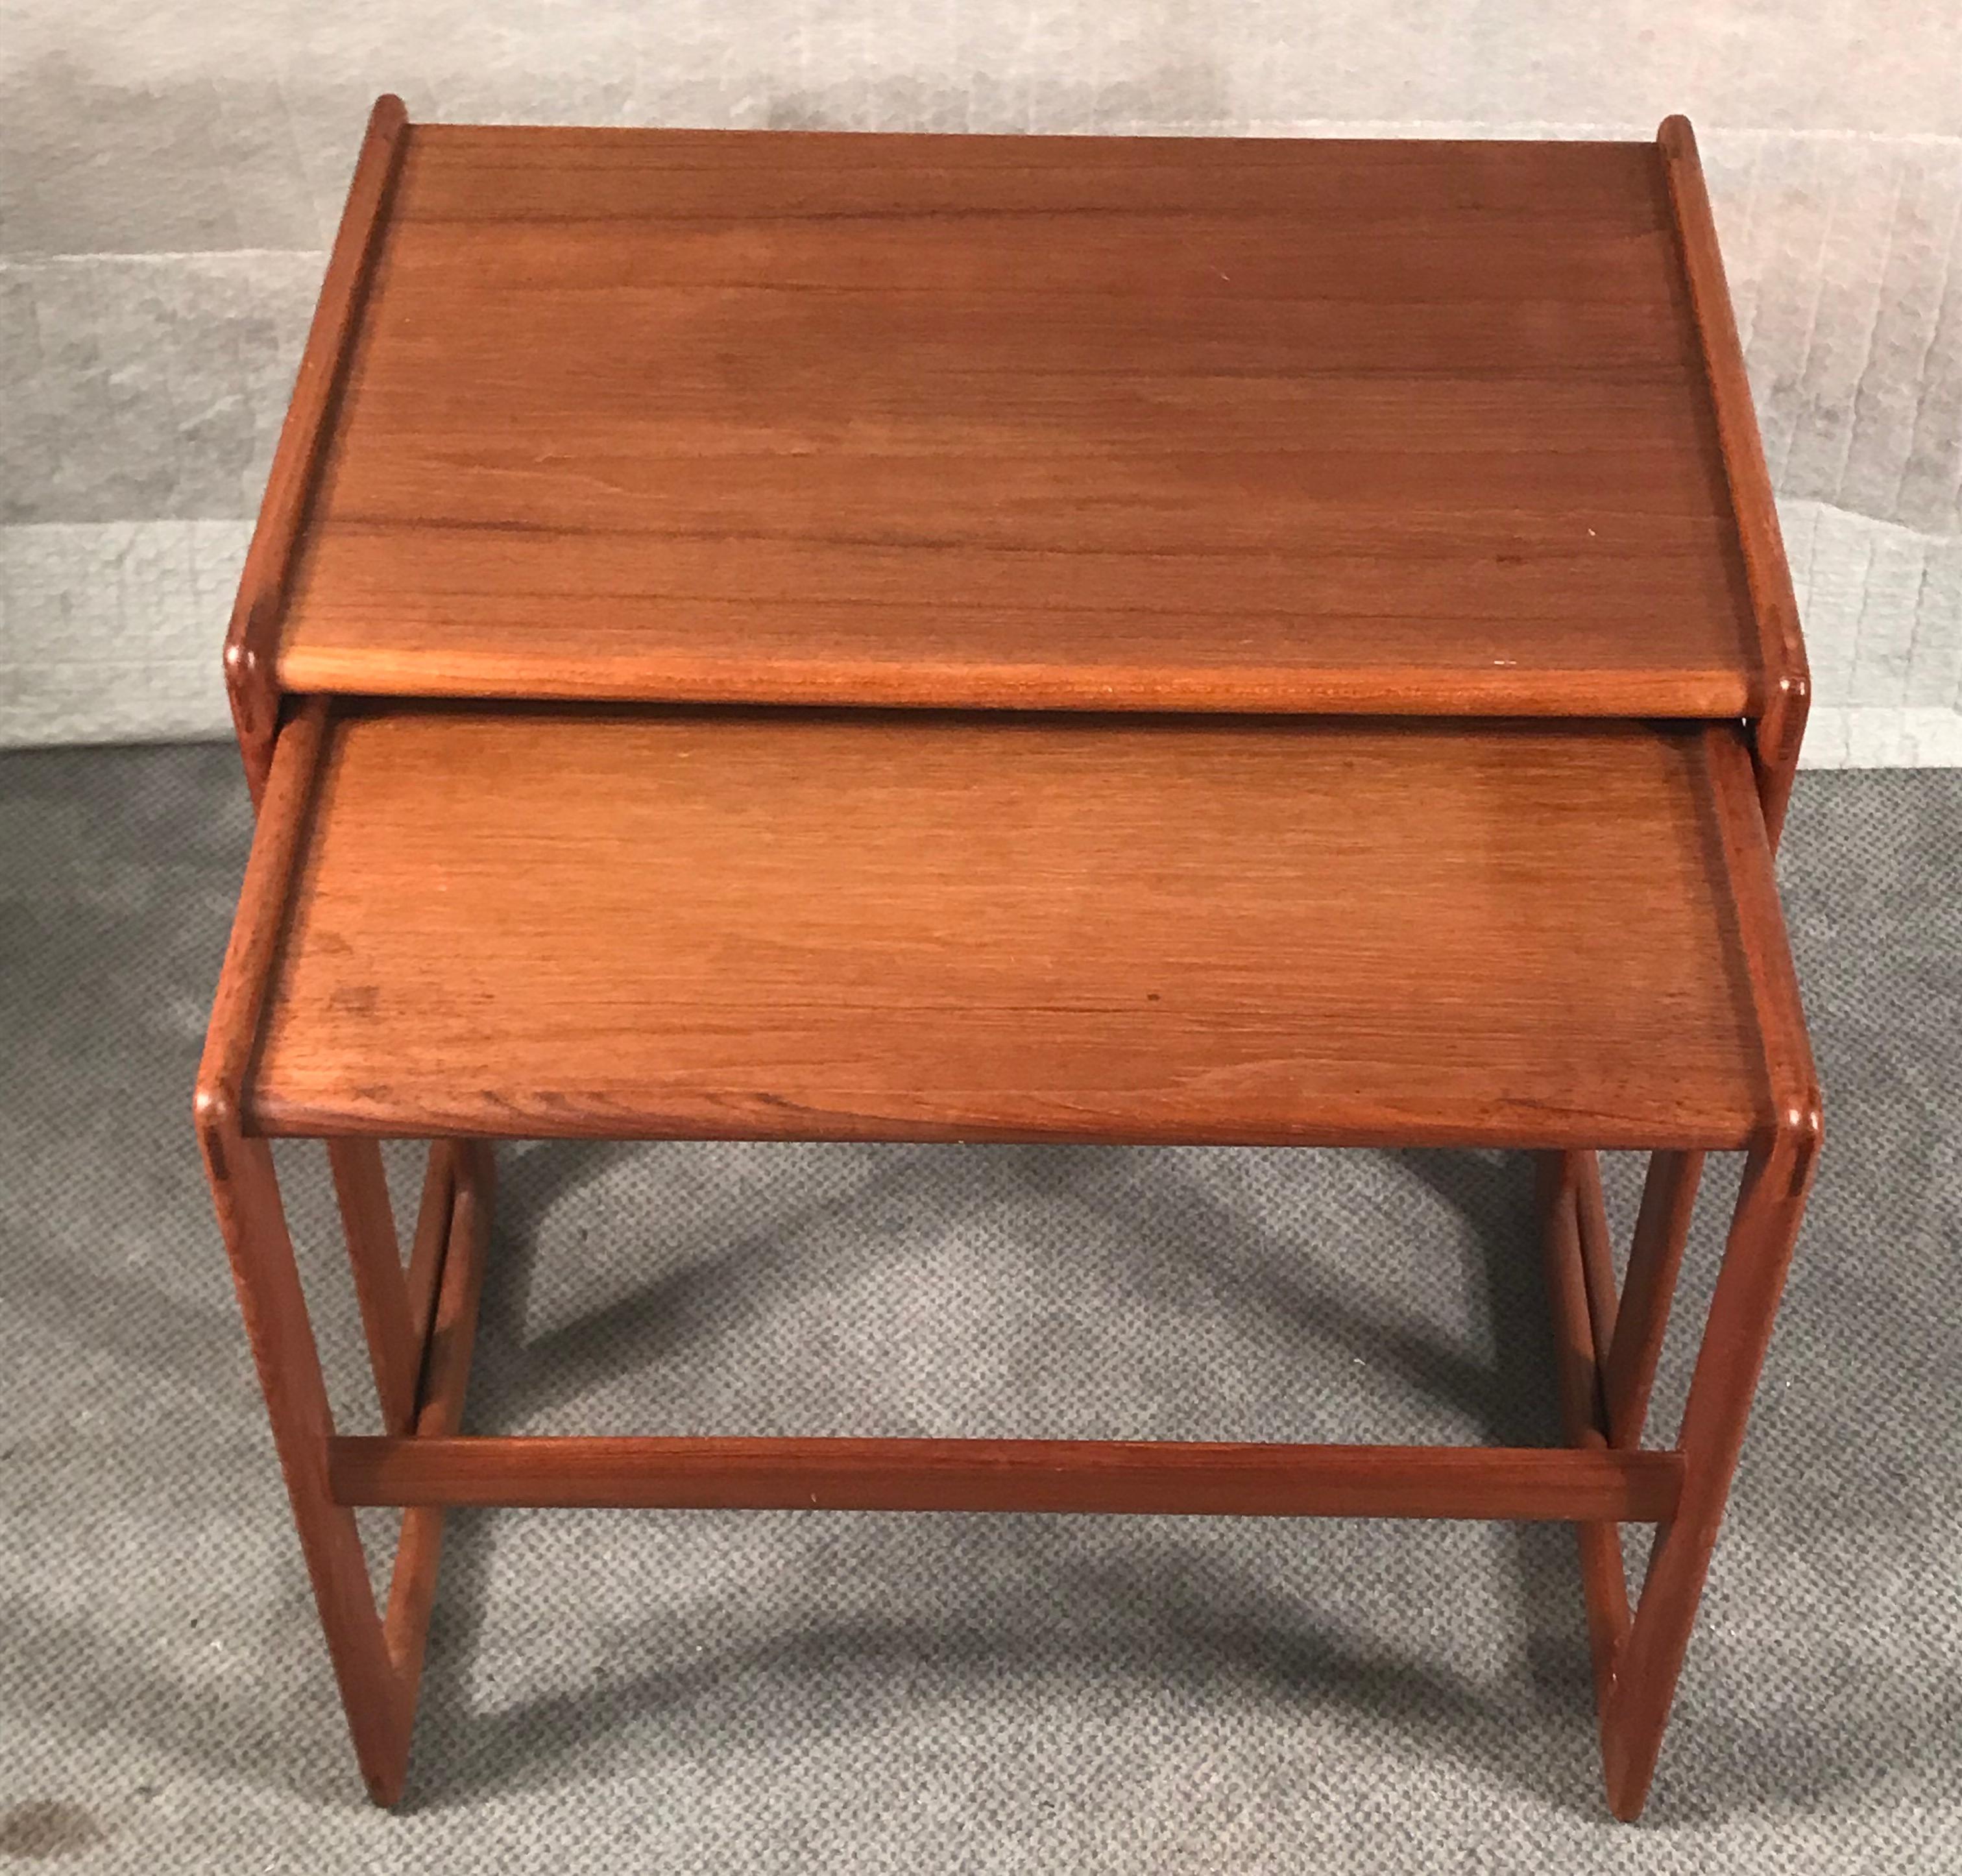 Two original mid-century nesting tables by Morgen-Kohl, Denmark 1960's.
The two rectangular tables have a typical clean mid-century design and are made of solid teakwood. 
The tables have the original MK label. 
They are in very good original